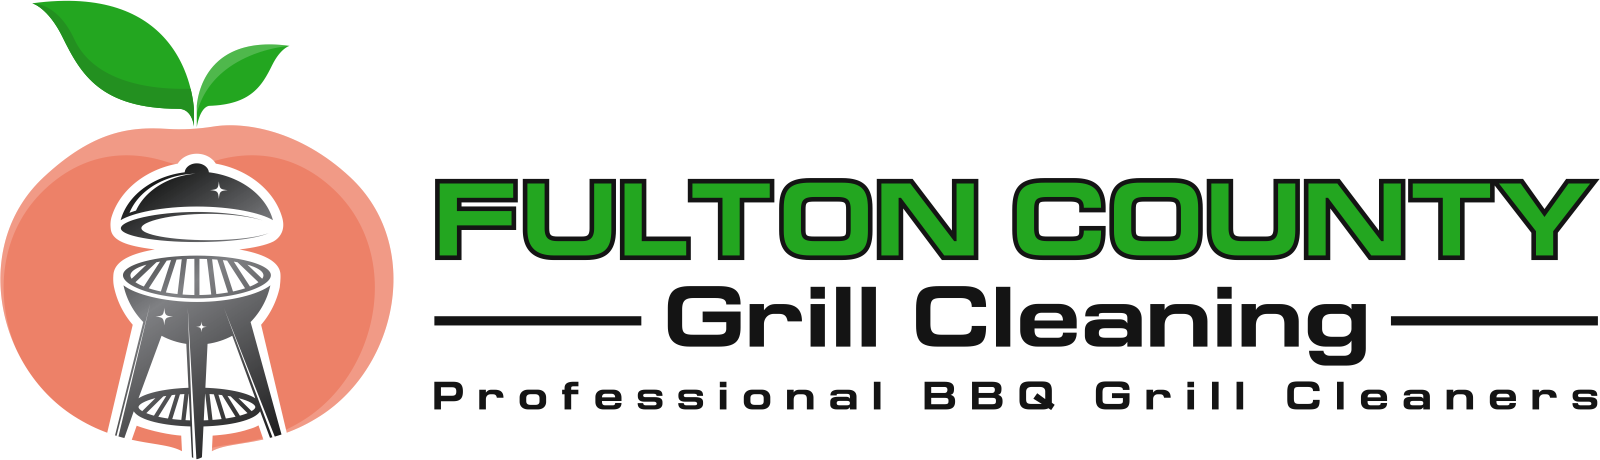 https://www.fultoncountygrillcleaning.com/wp-content/uploads/2020/11/2-2.png